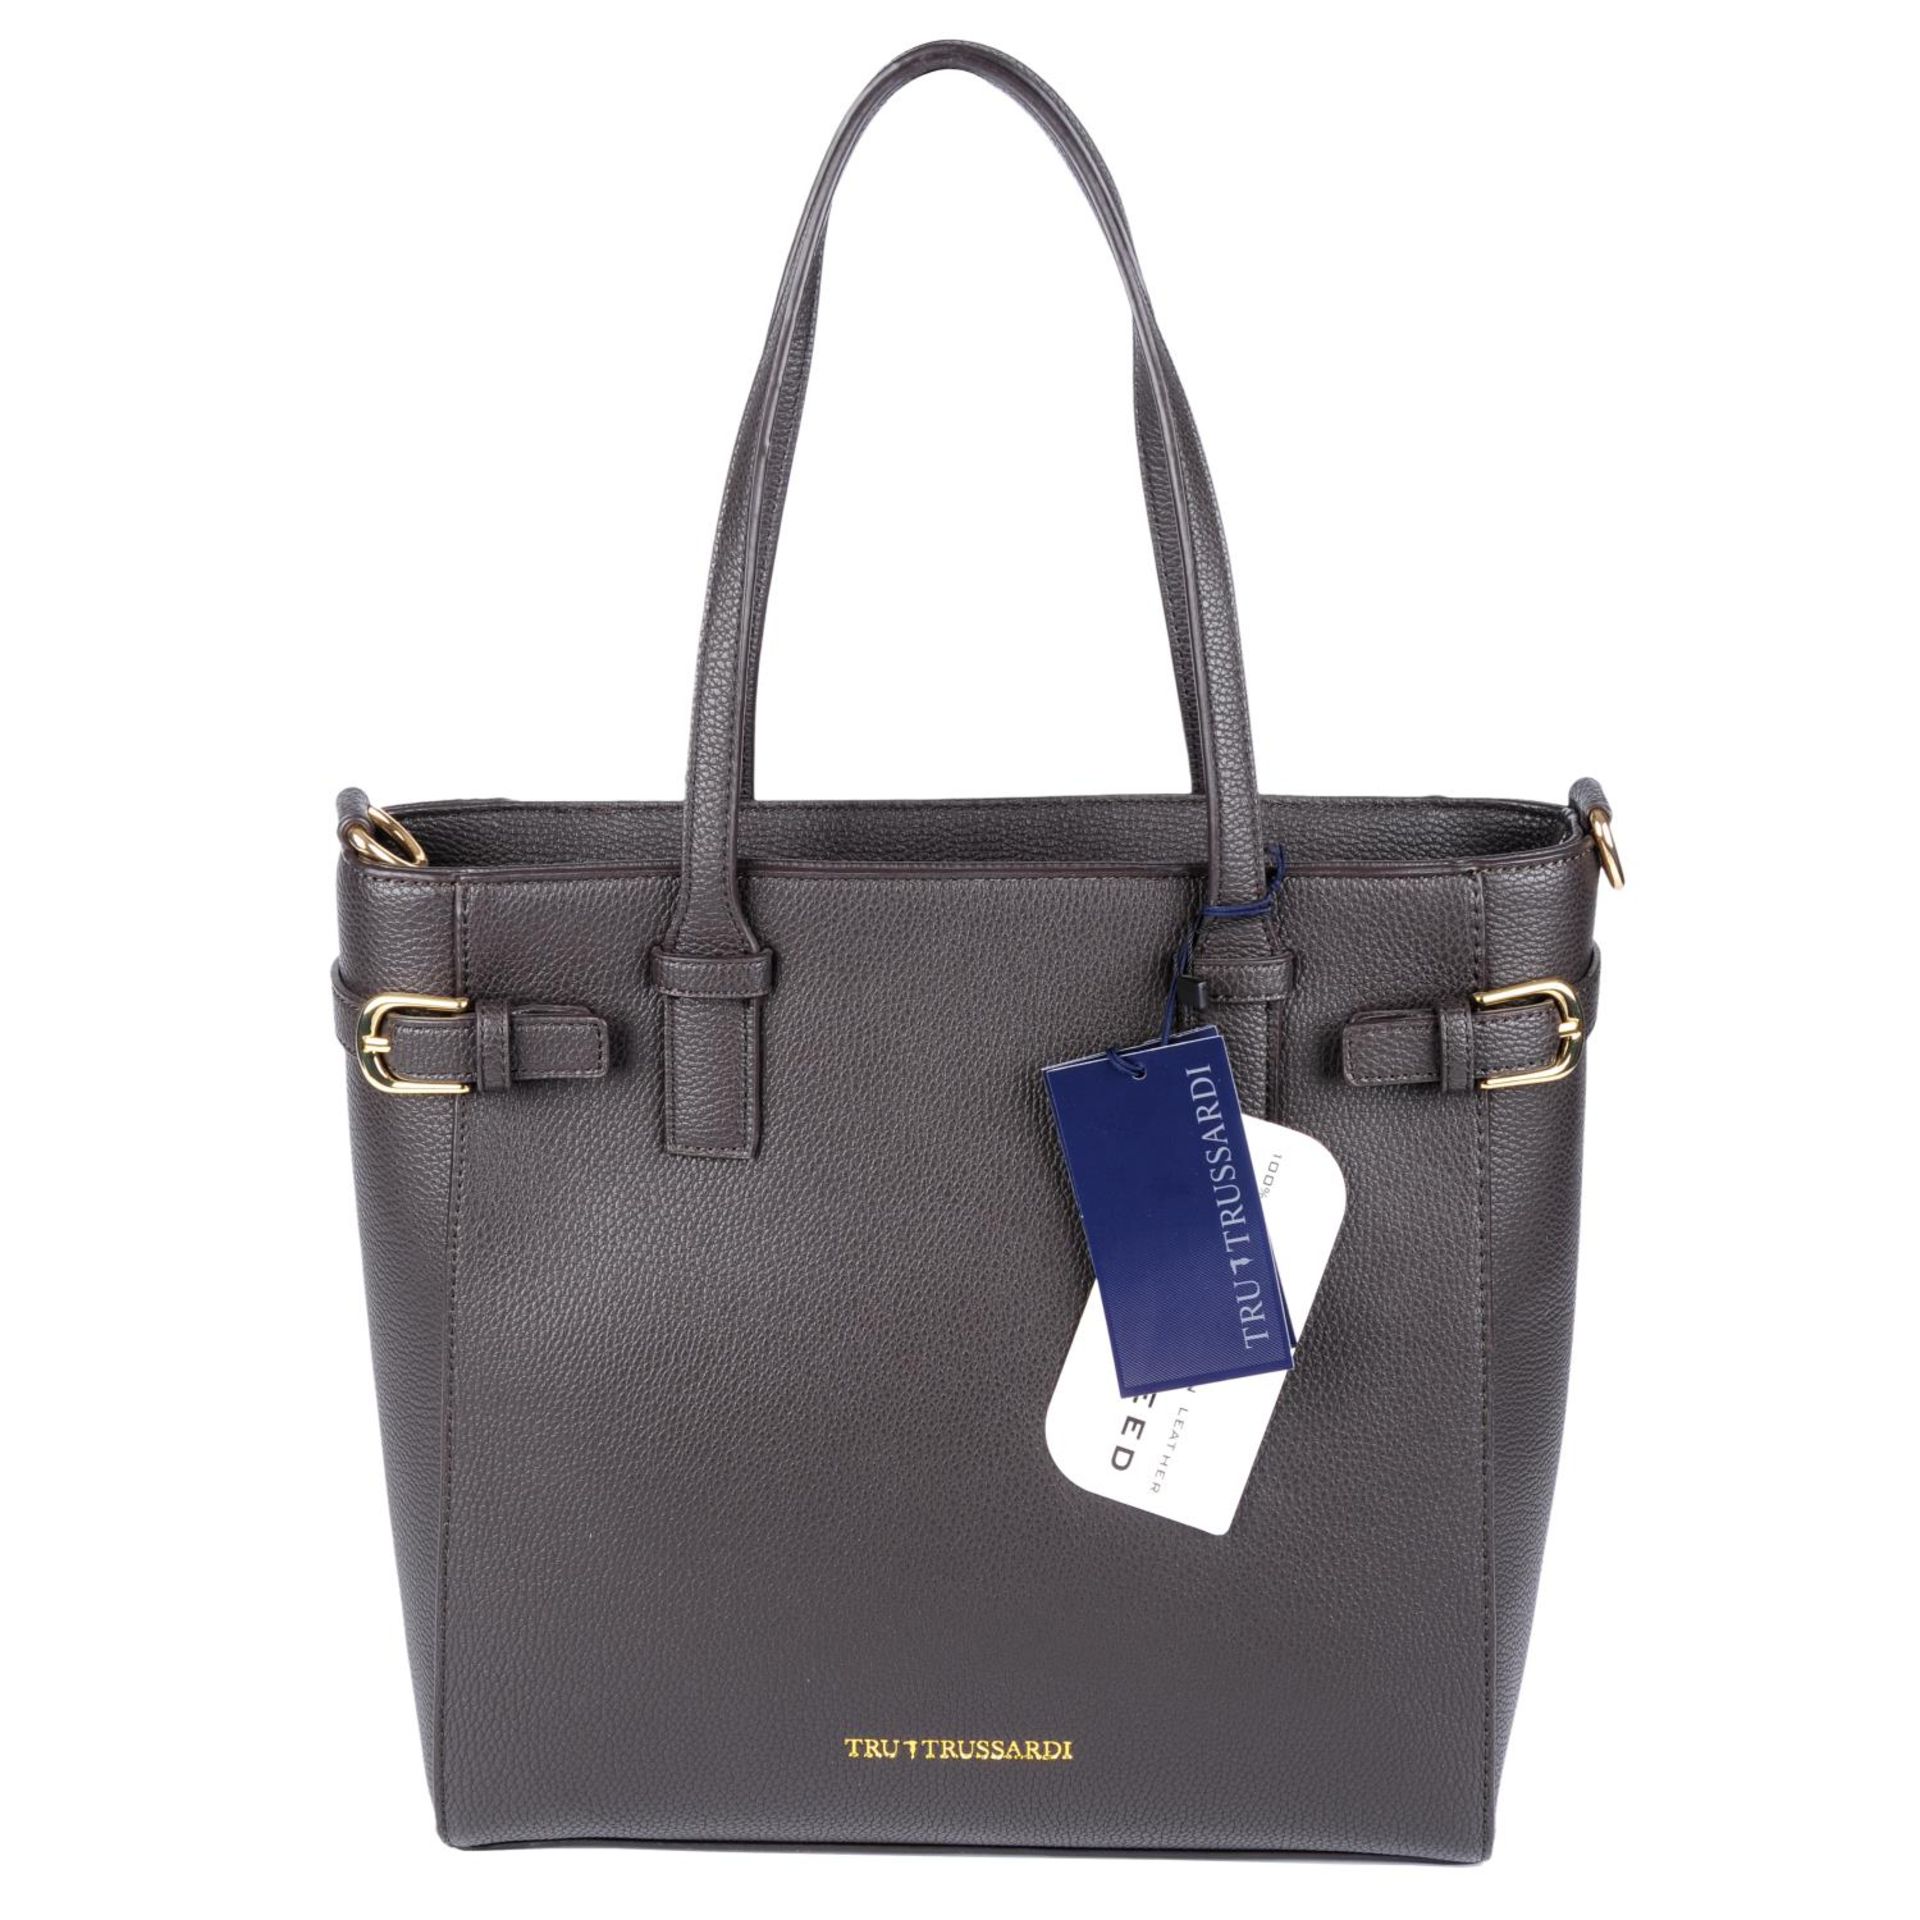 TRUSSARDI - a brown leather tote.